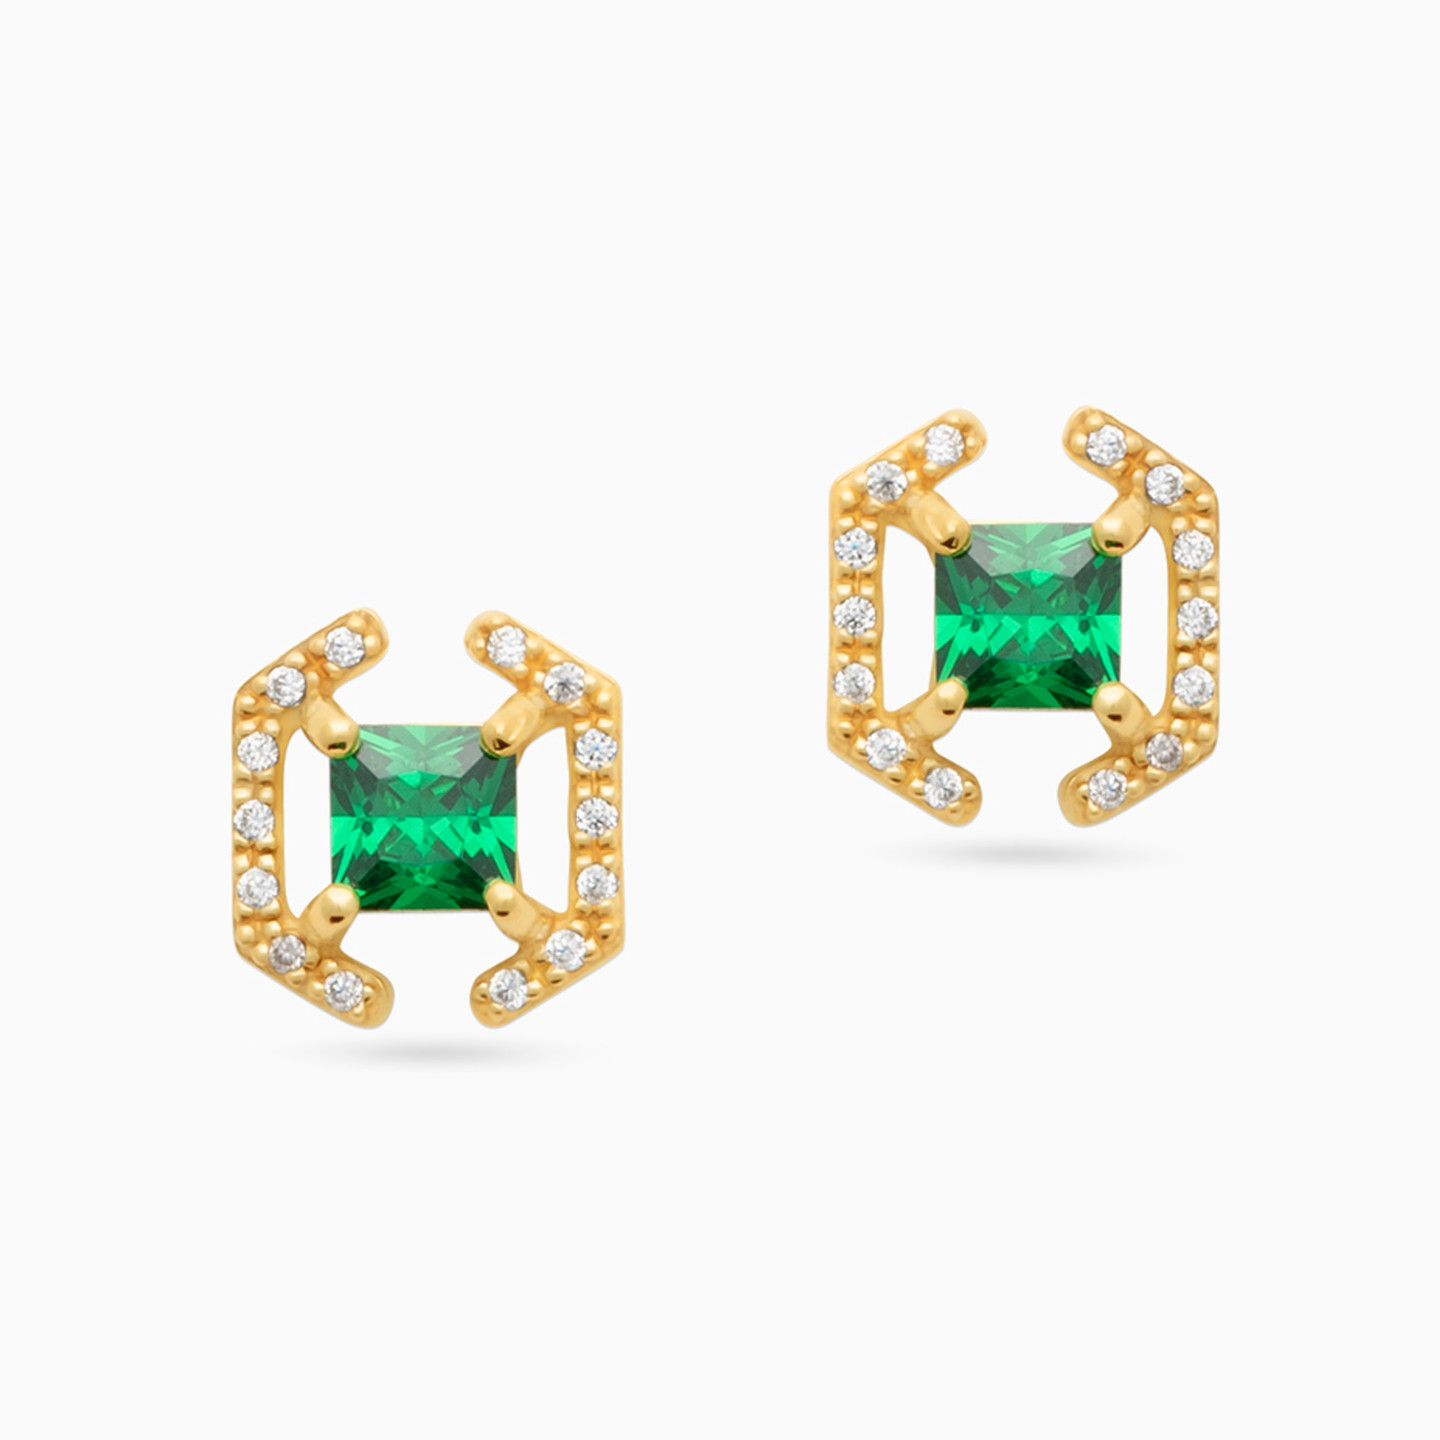 Gold Plated Colored Stones Stud Earrings